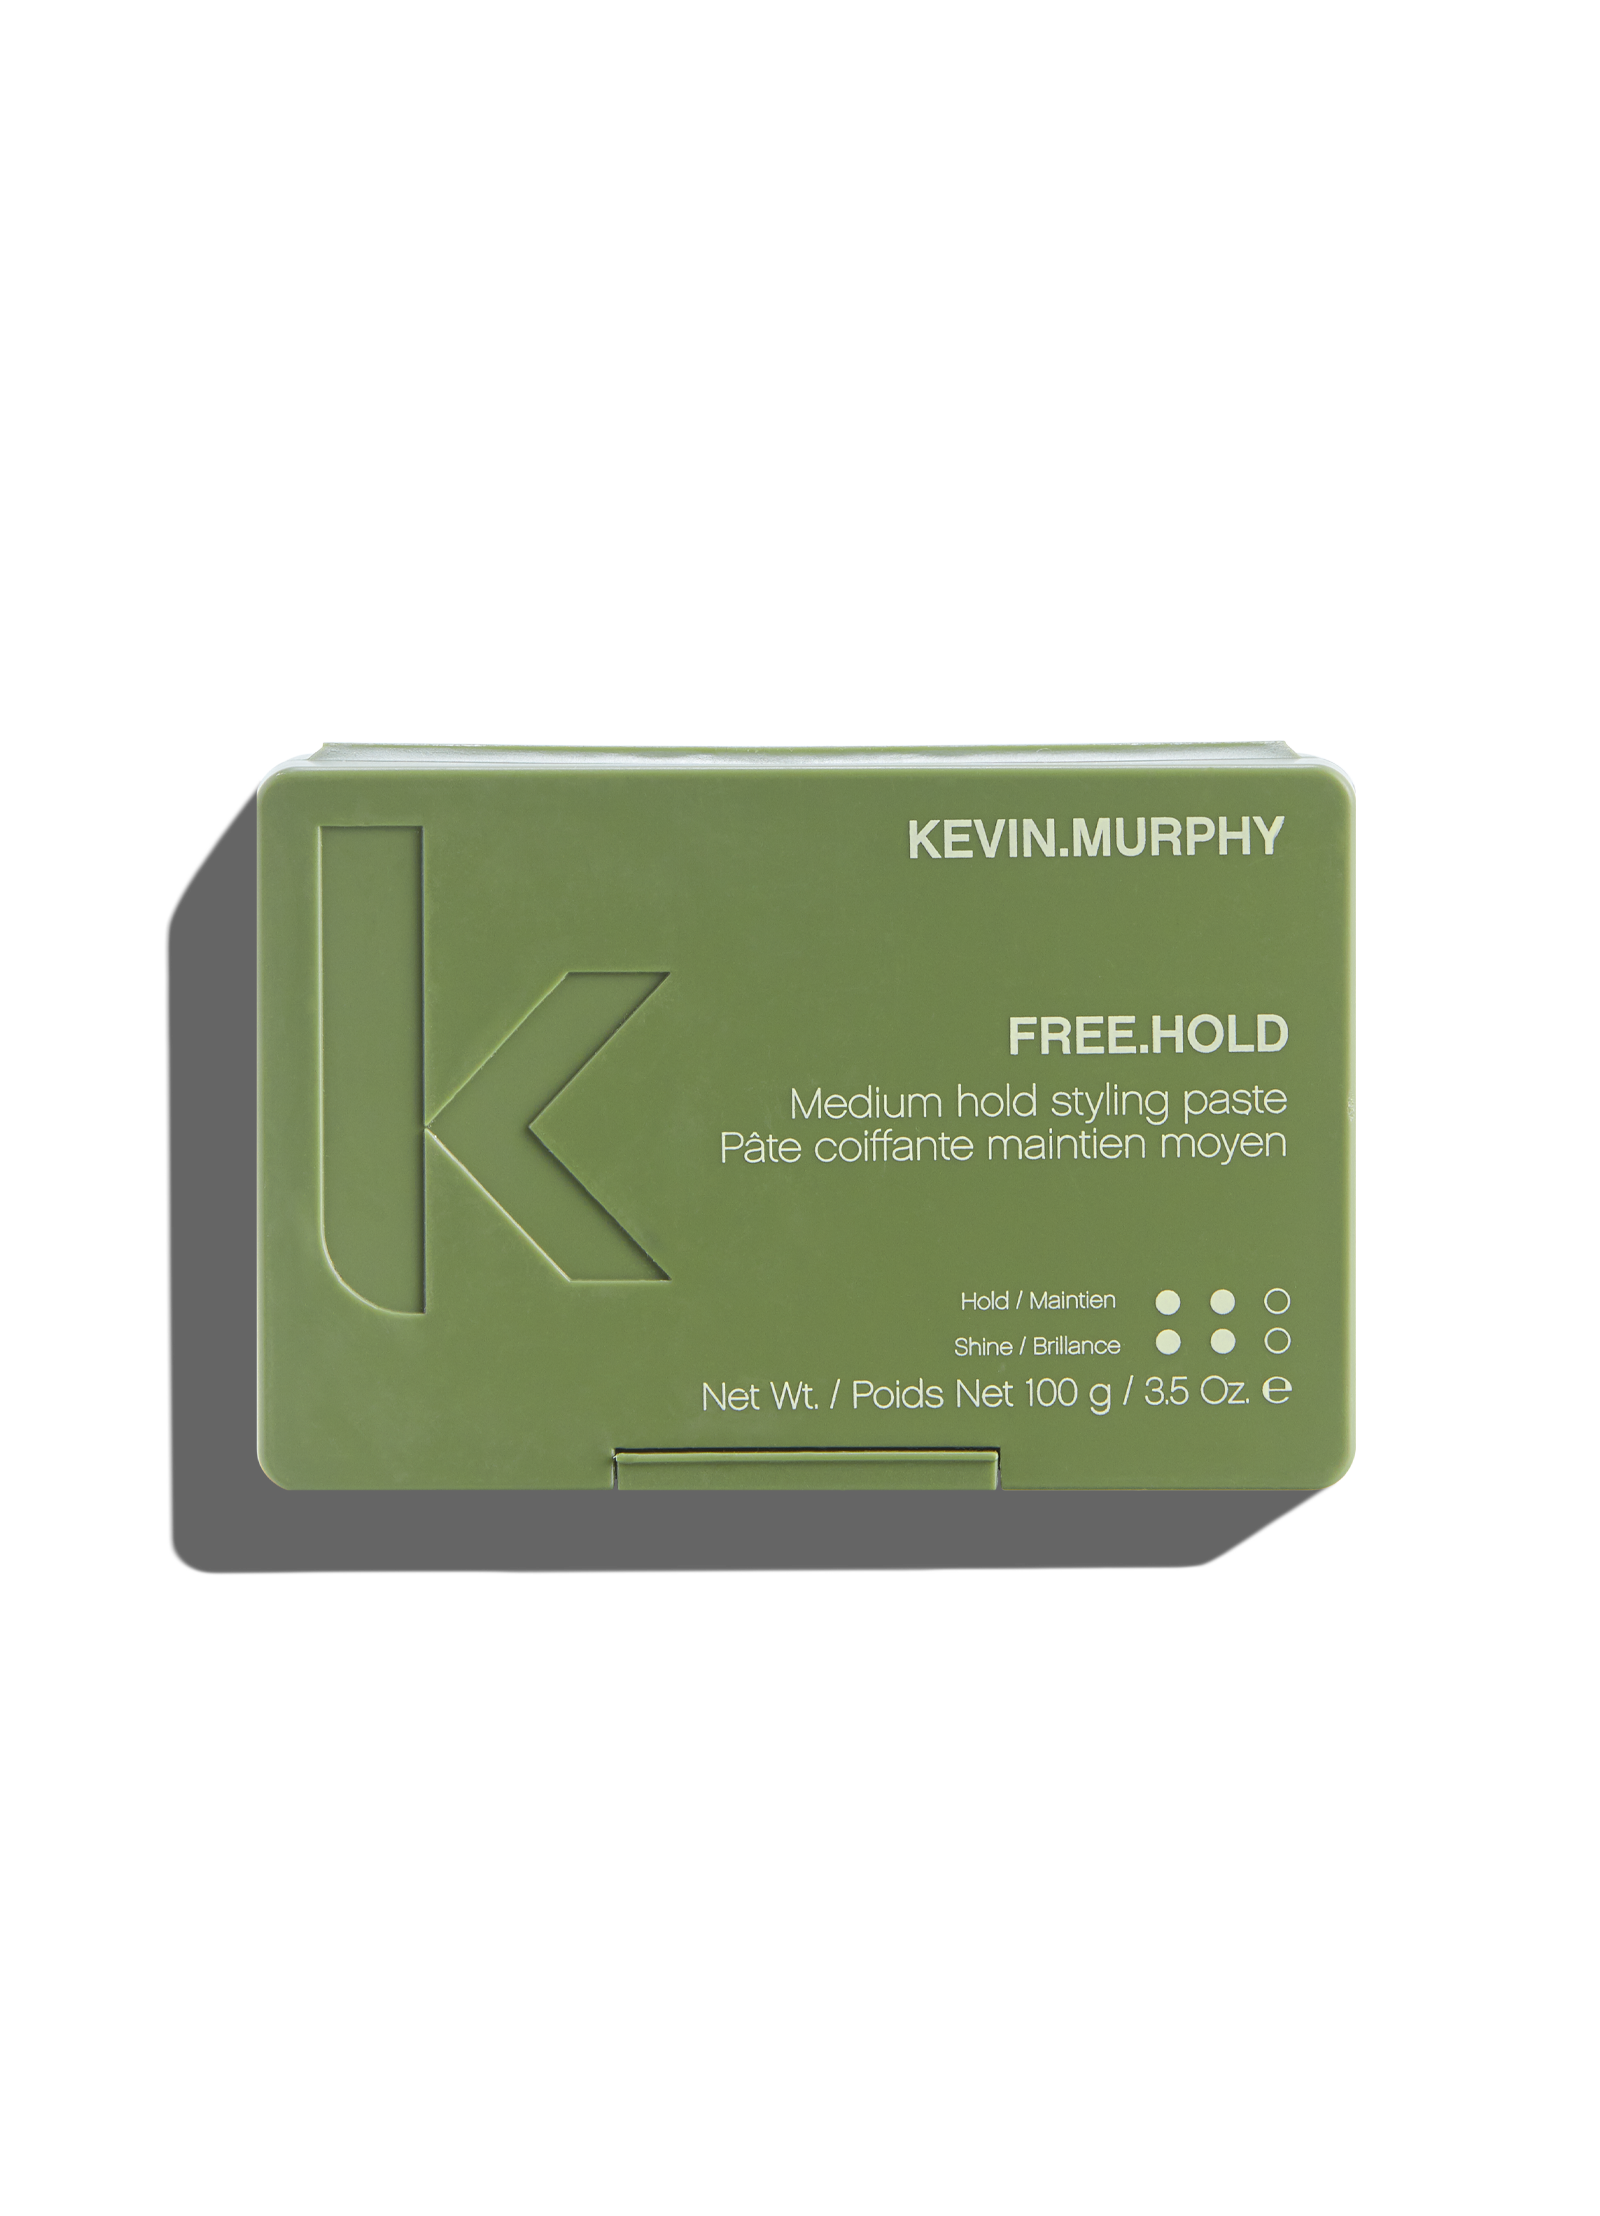 Kevin Murphy is redefining hair care products  BELLO Mag